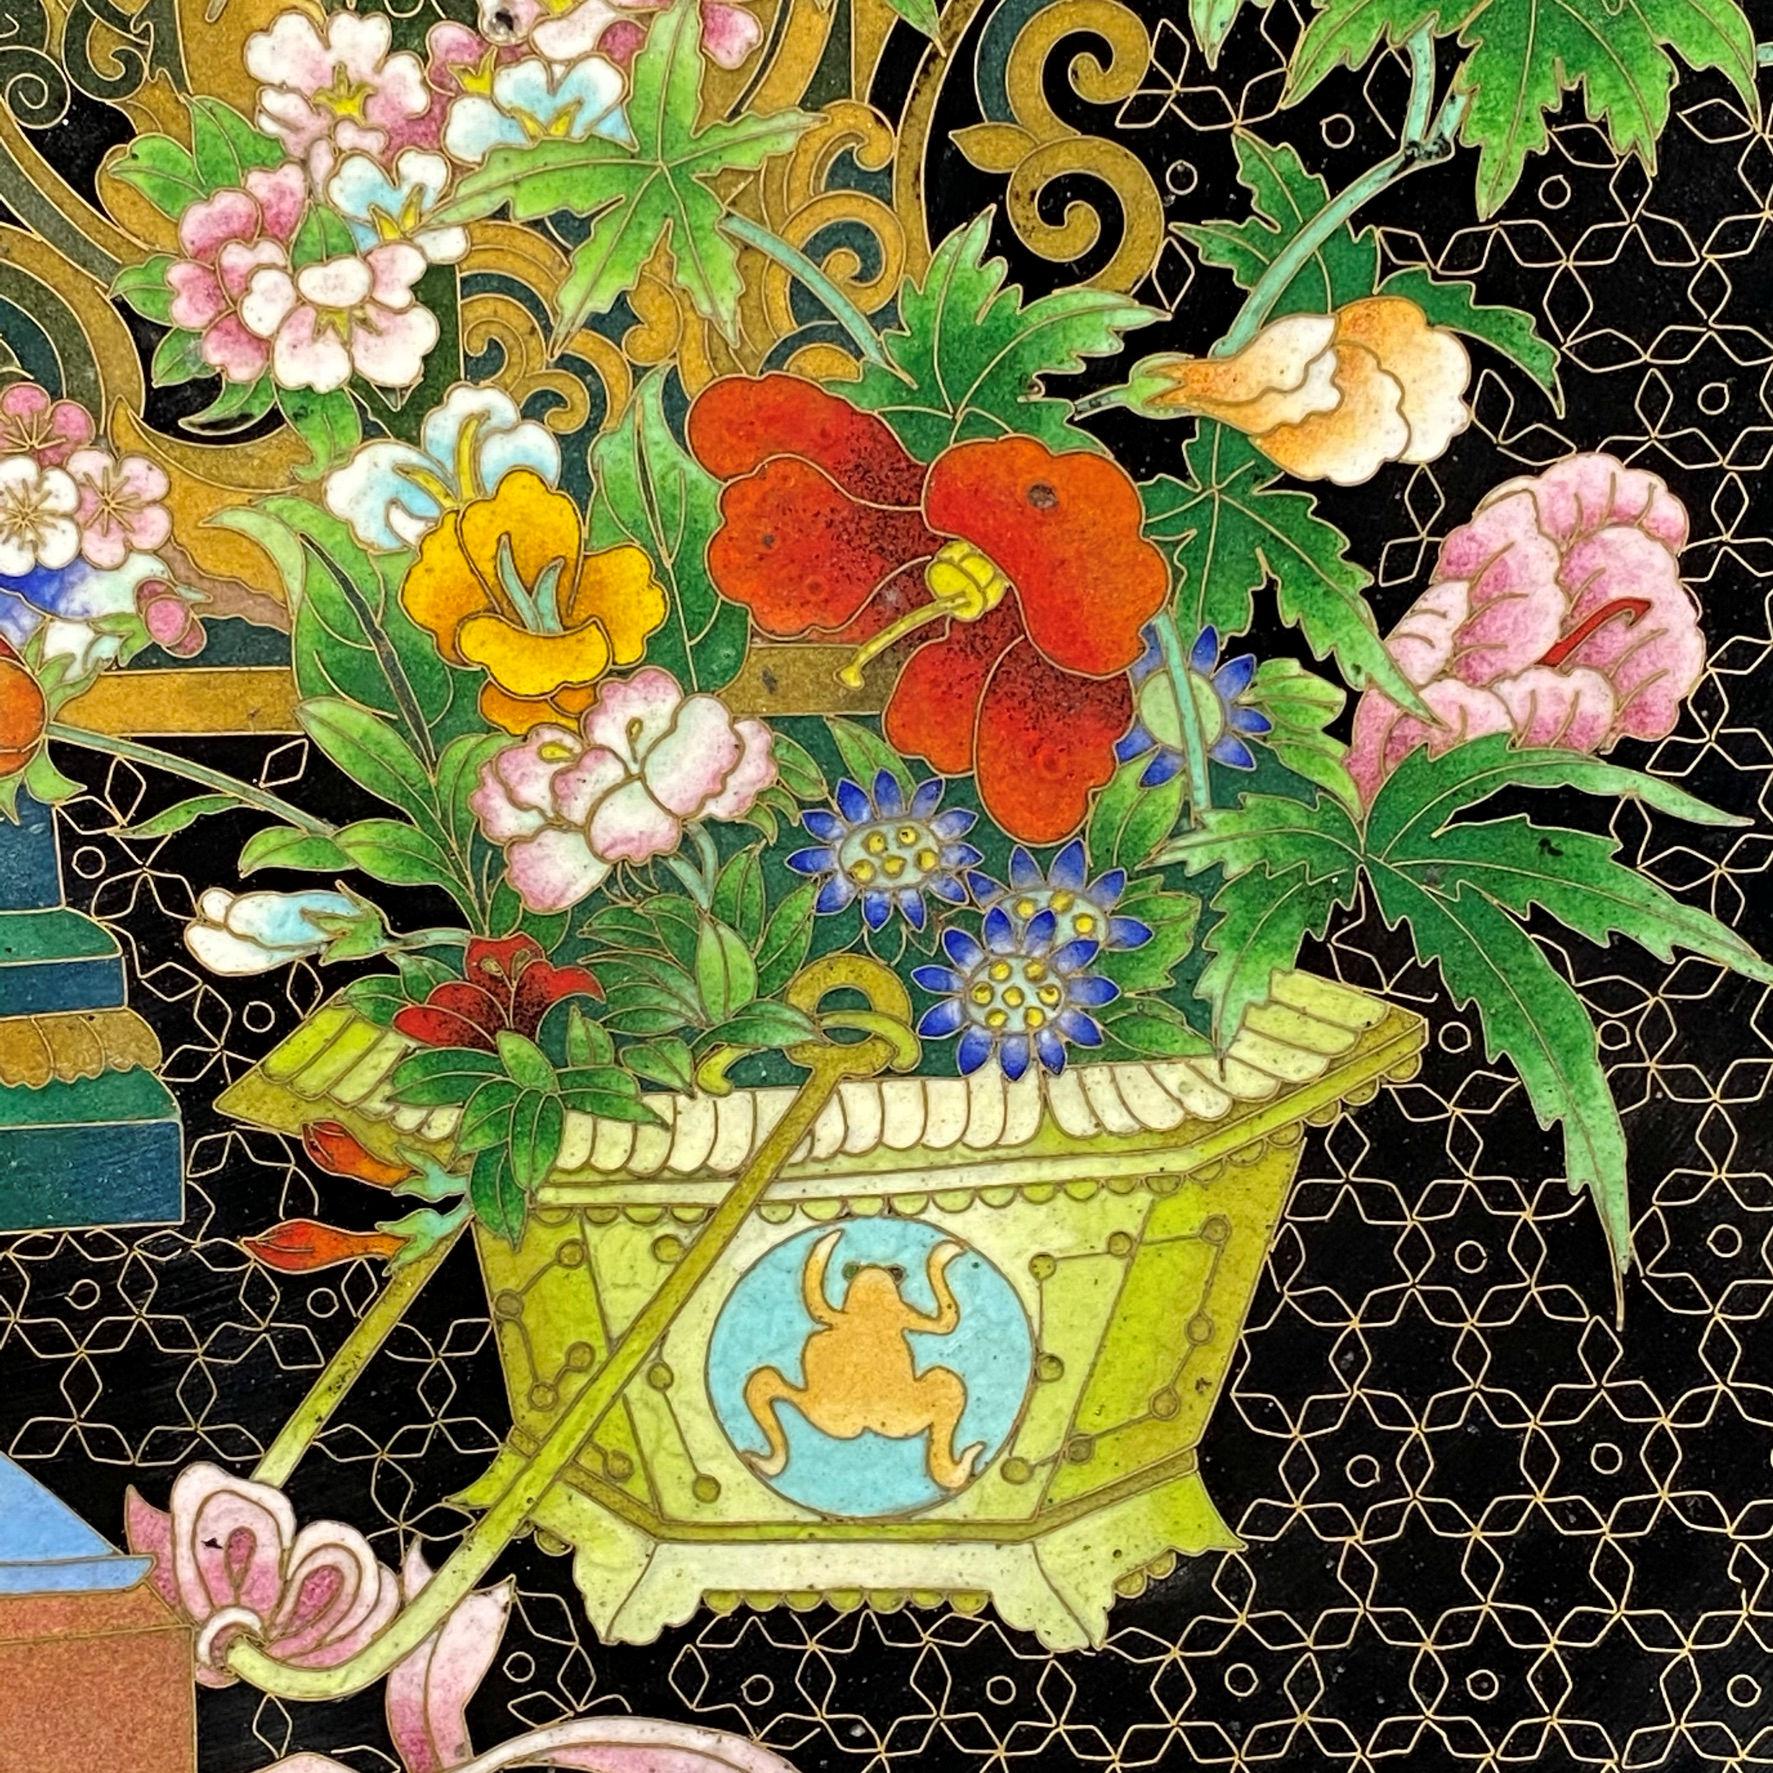 20th Century Chinese Cloisonne 'Scholar's Still Life' Charger